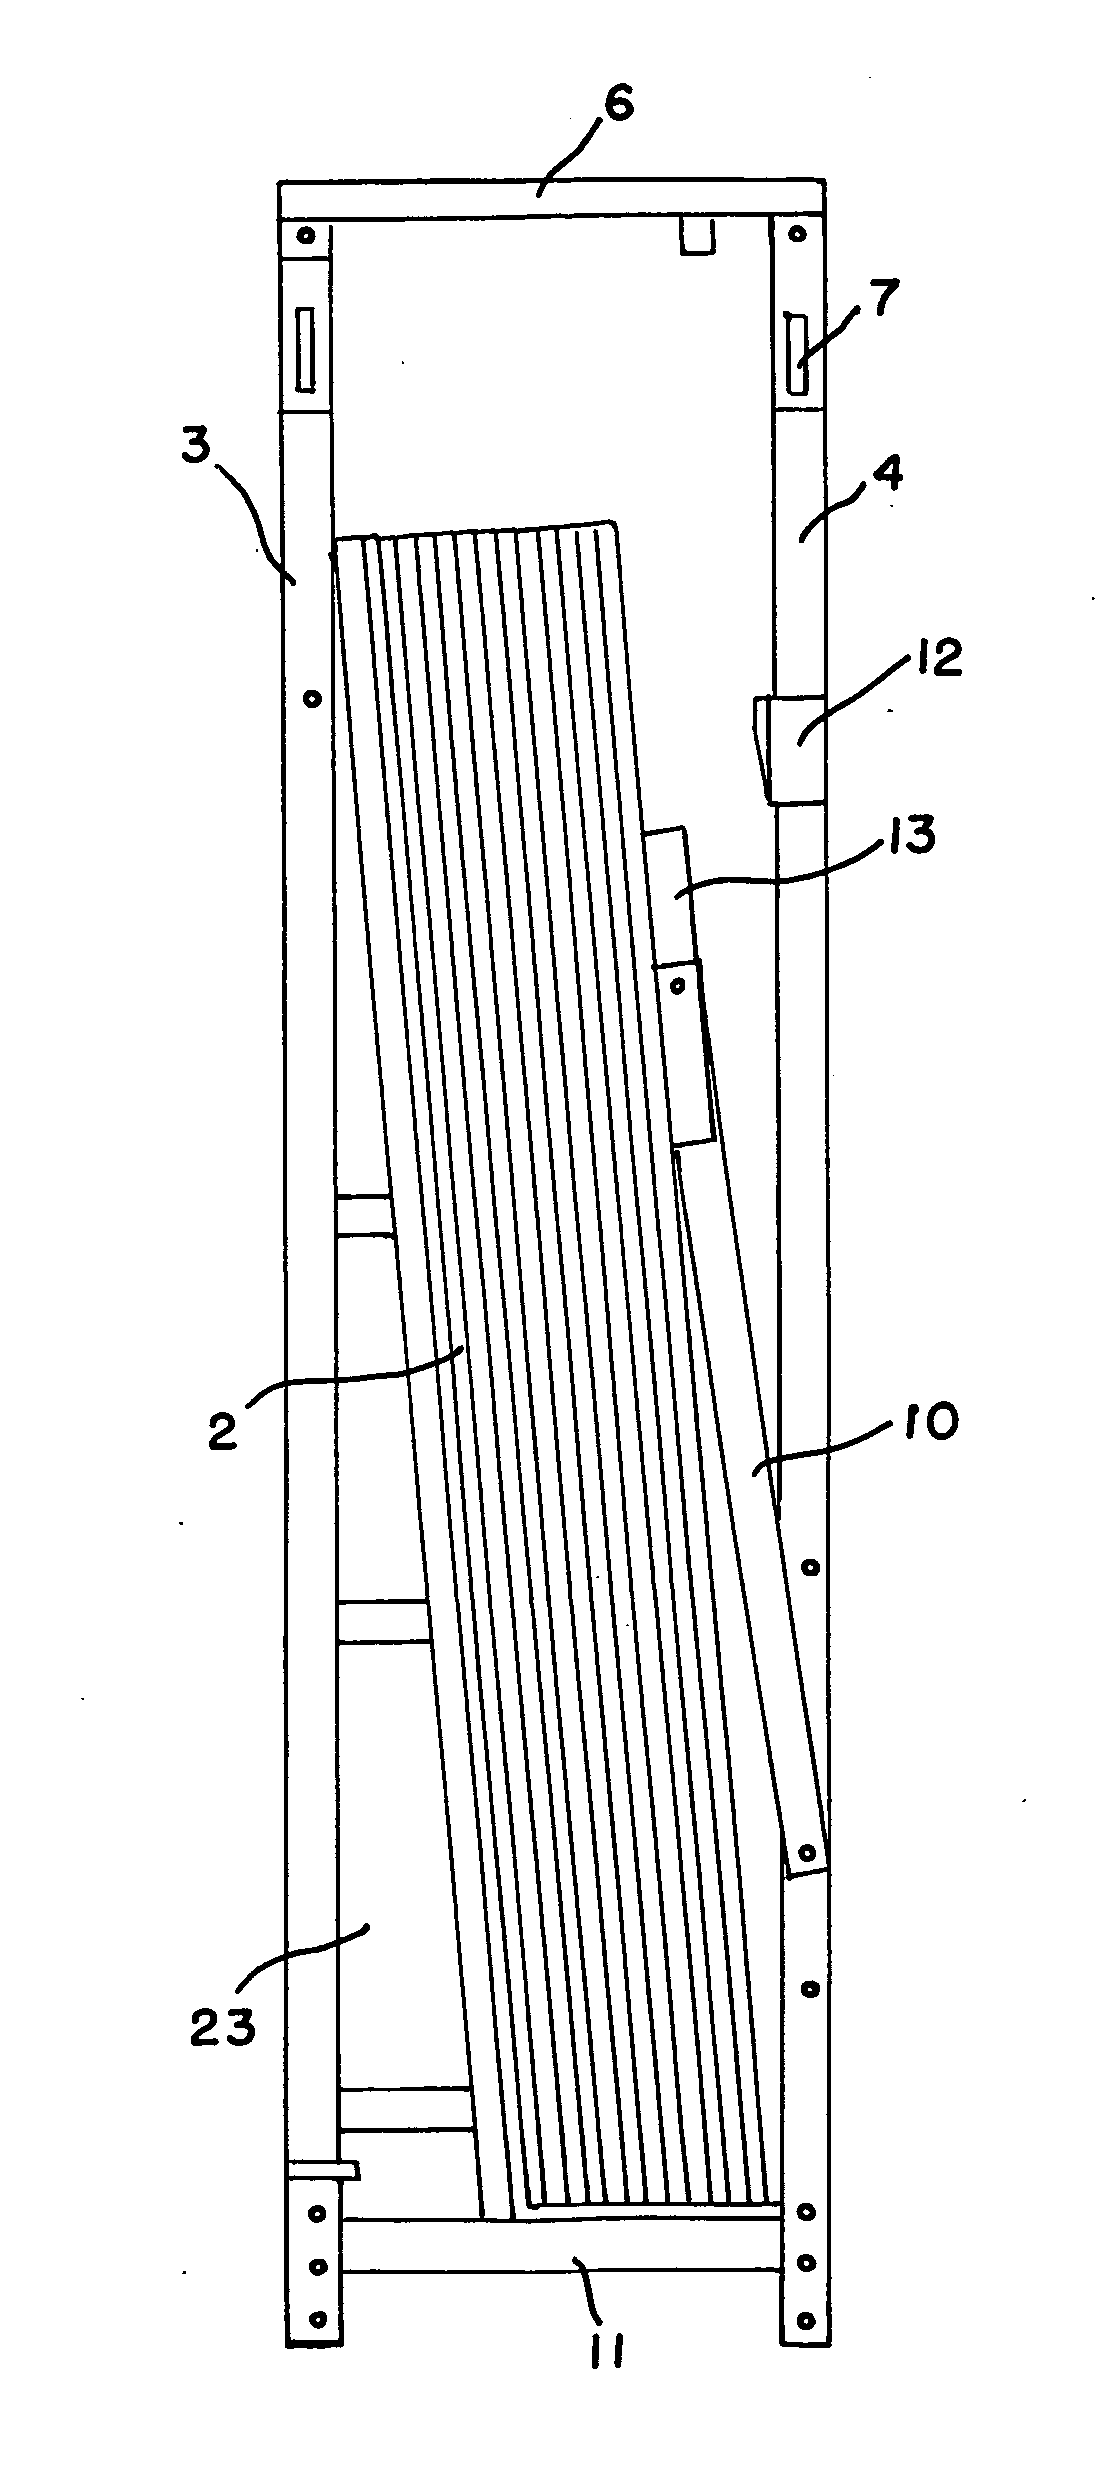 System for safely transporting loading and unloading slabs